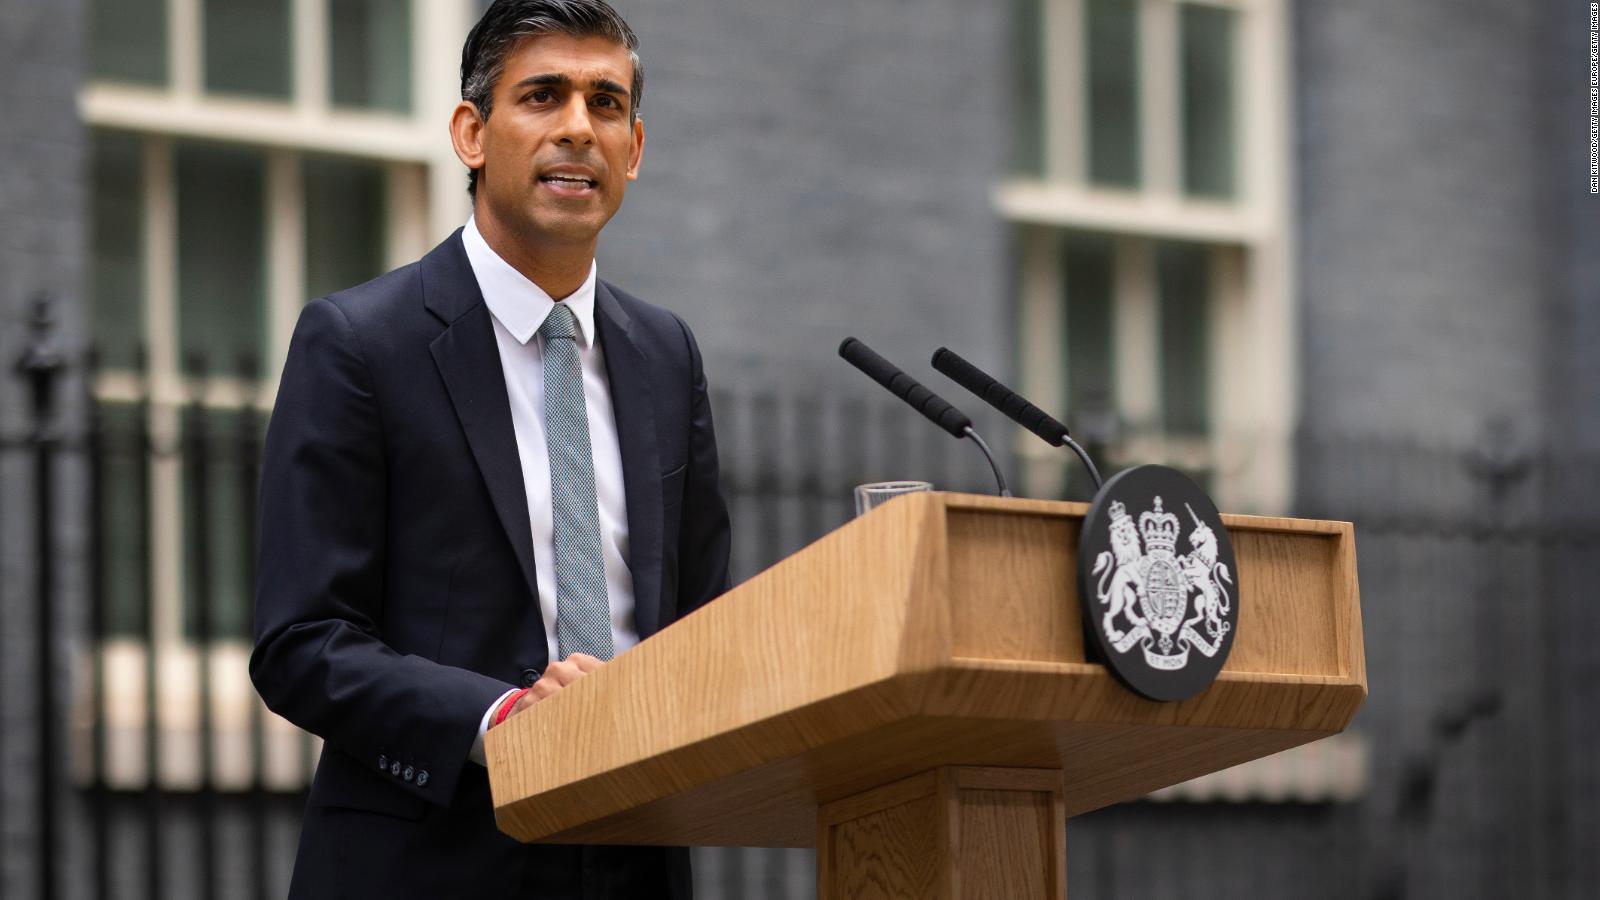 Rishi Sunak, of Indian origin, is the new Prime Minister of the United Kingdom